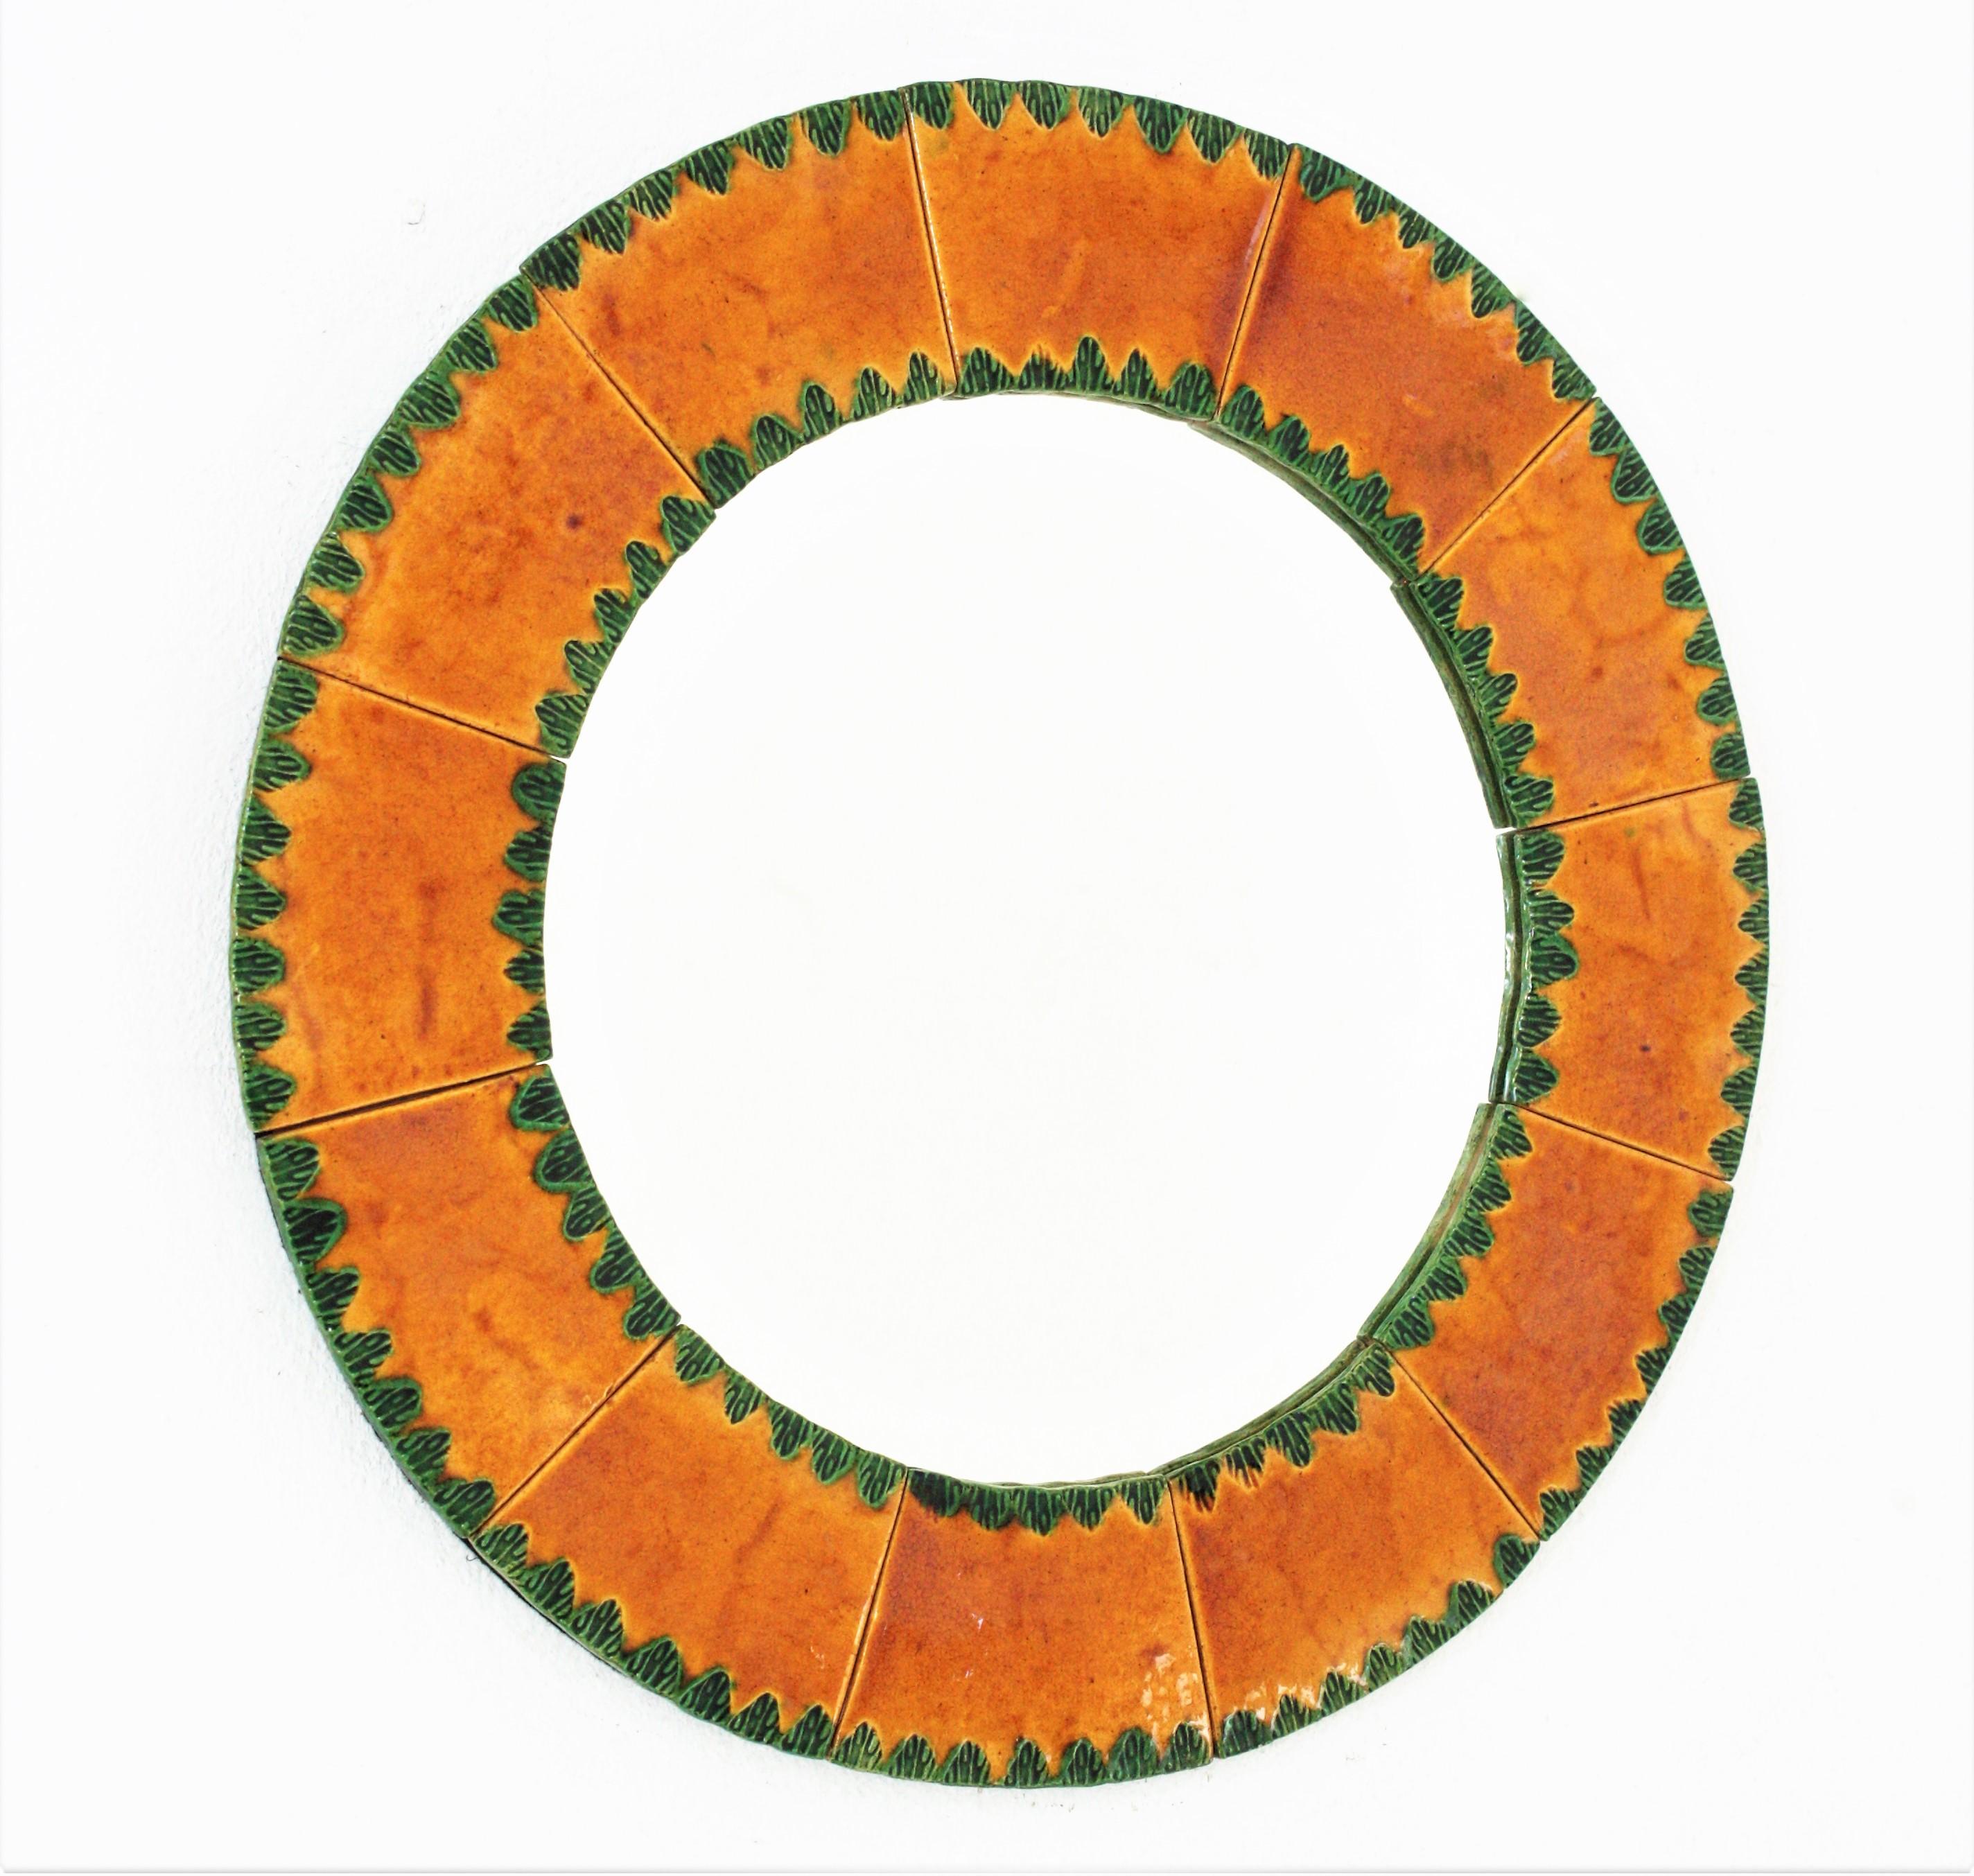 Midcentury orange and green glazed ceramic round mirror . France, 1960s
The frame features a mosaic of large orange ceramic tiles with leafed patterns in green ceramic.
This pretty beautiful ceramic mirror with naturalistic motifs will be the